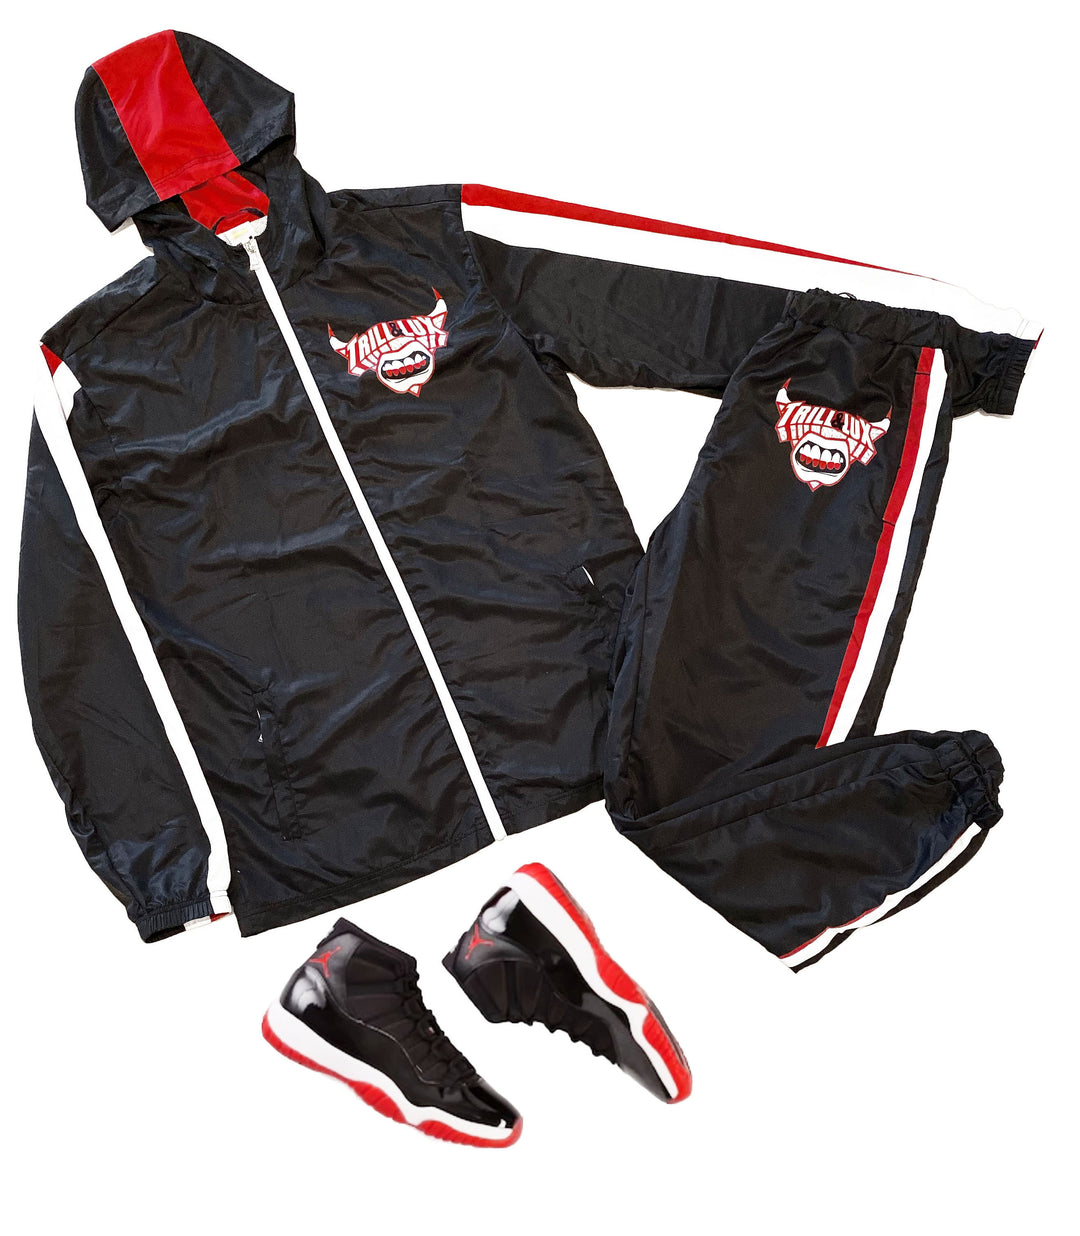 Trill and Lux | Tracksuit | Inspired by Air jordan 11 Bred | Colorblock | Black